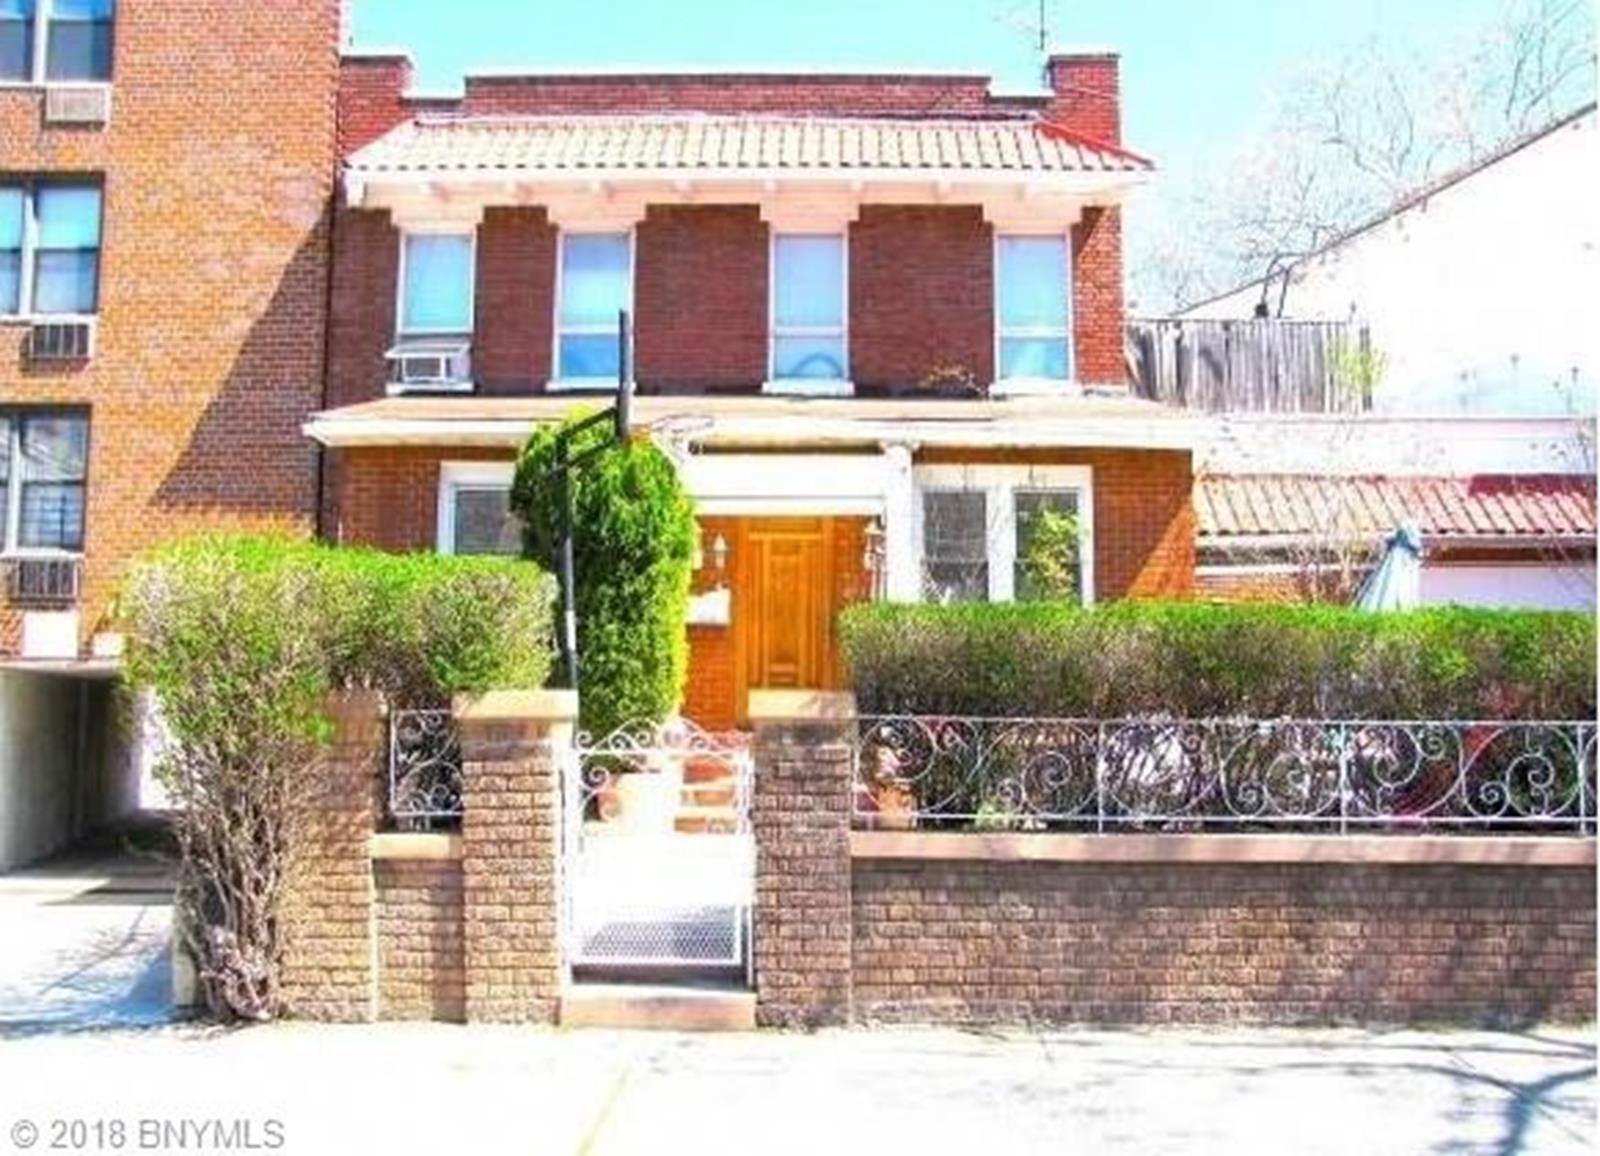 A ONCE IN A LIFETIME OPPORTUNITY TO OWN ONE OF THE LAST FREE STANDING SOLID BRICK 1 FAMILY HOMES ON OCEAN PARKWAY.